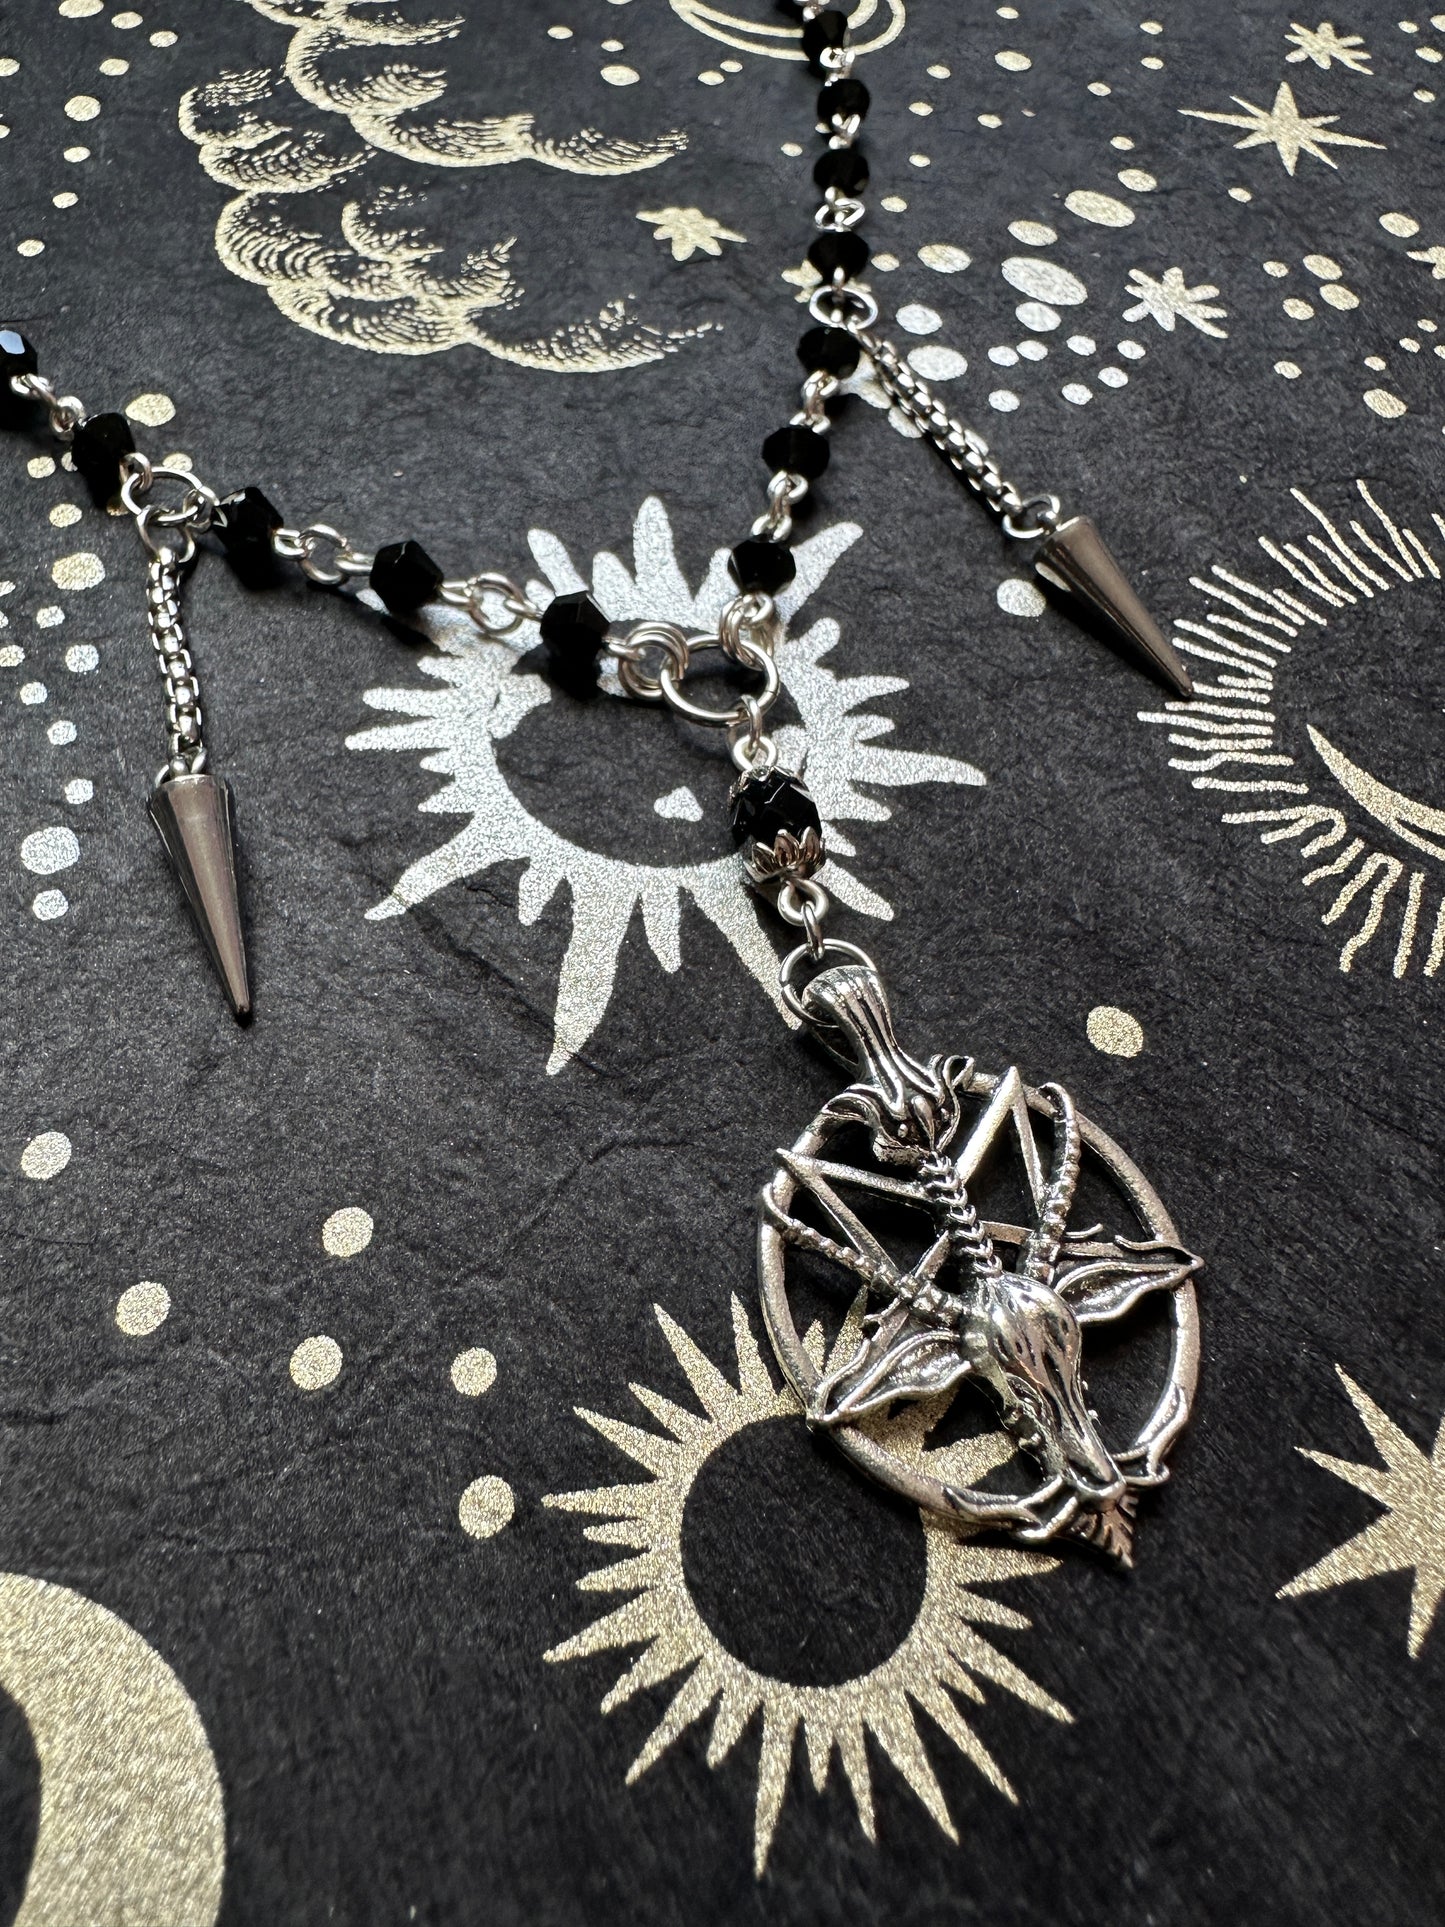 Sigil of Baphomet choker with spikes